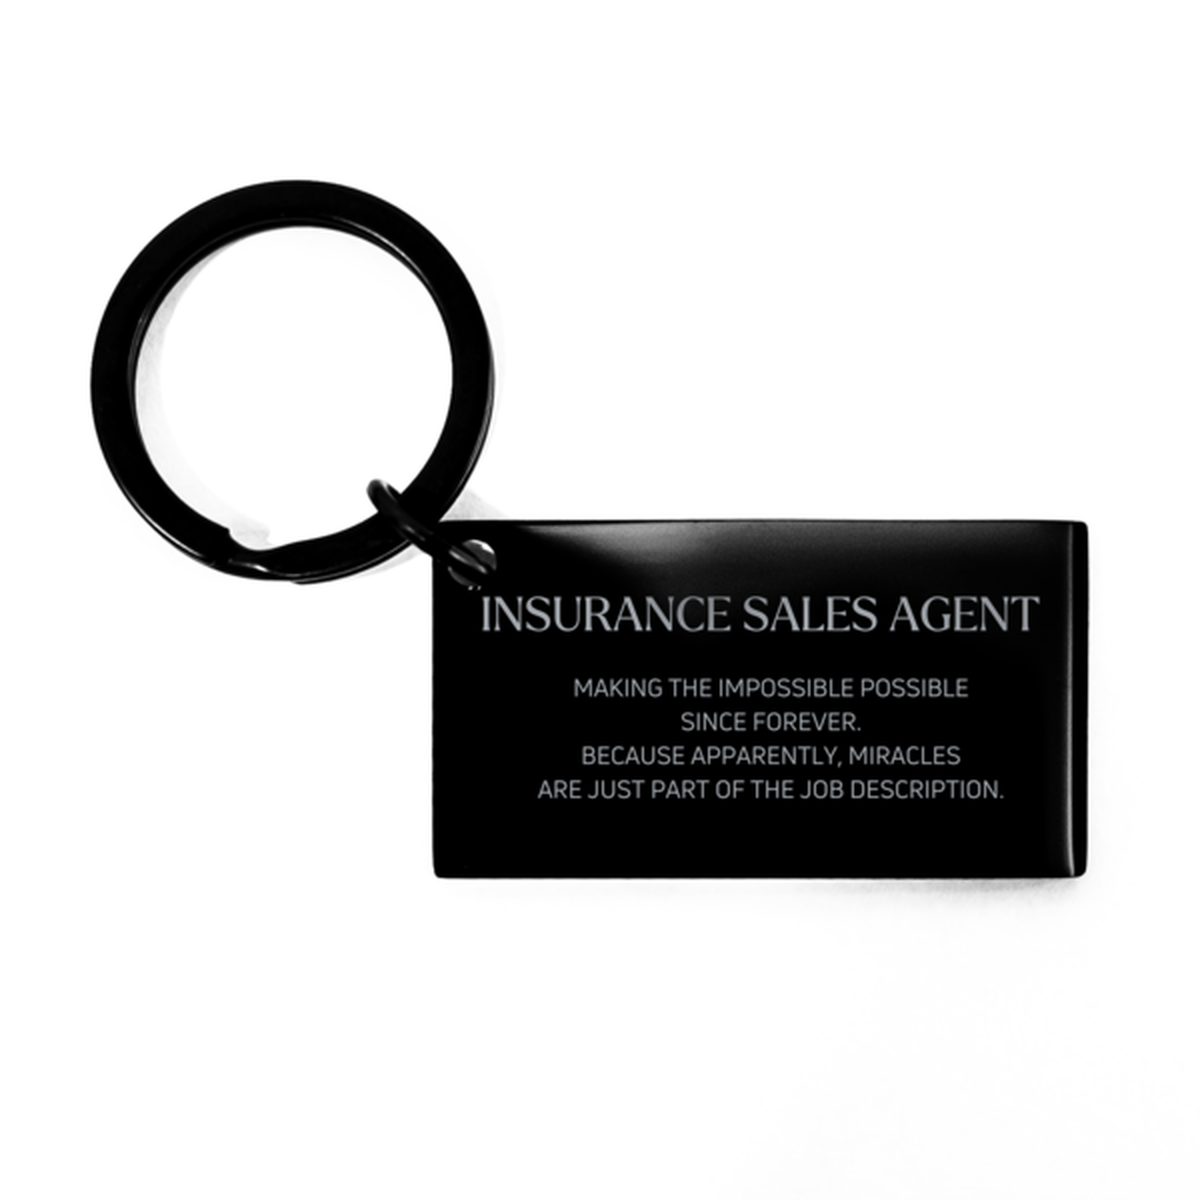 Funny Insurance Sales Agent Gifts, Miracles are just part of the job description, Inspirational Birthday Keychain For Insurance Sales Agent, Men, Women, Coworkers, Friends, Boss